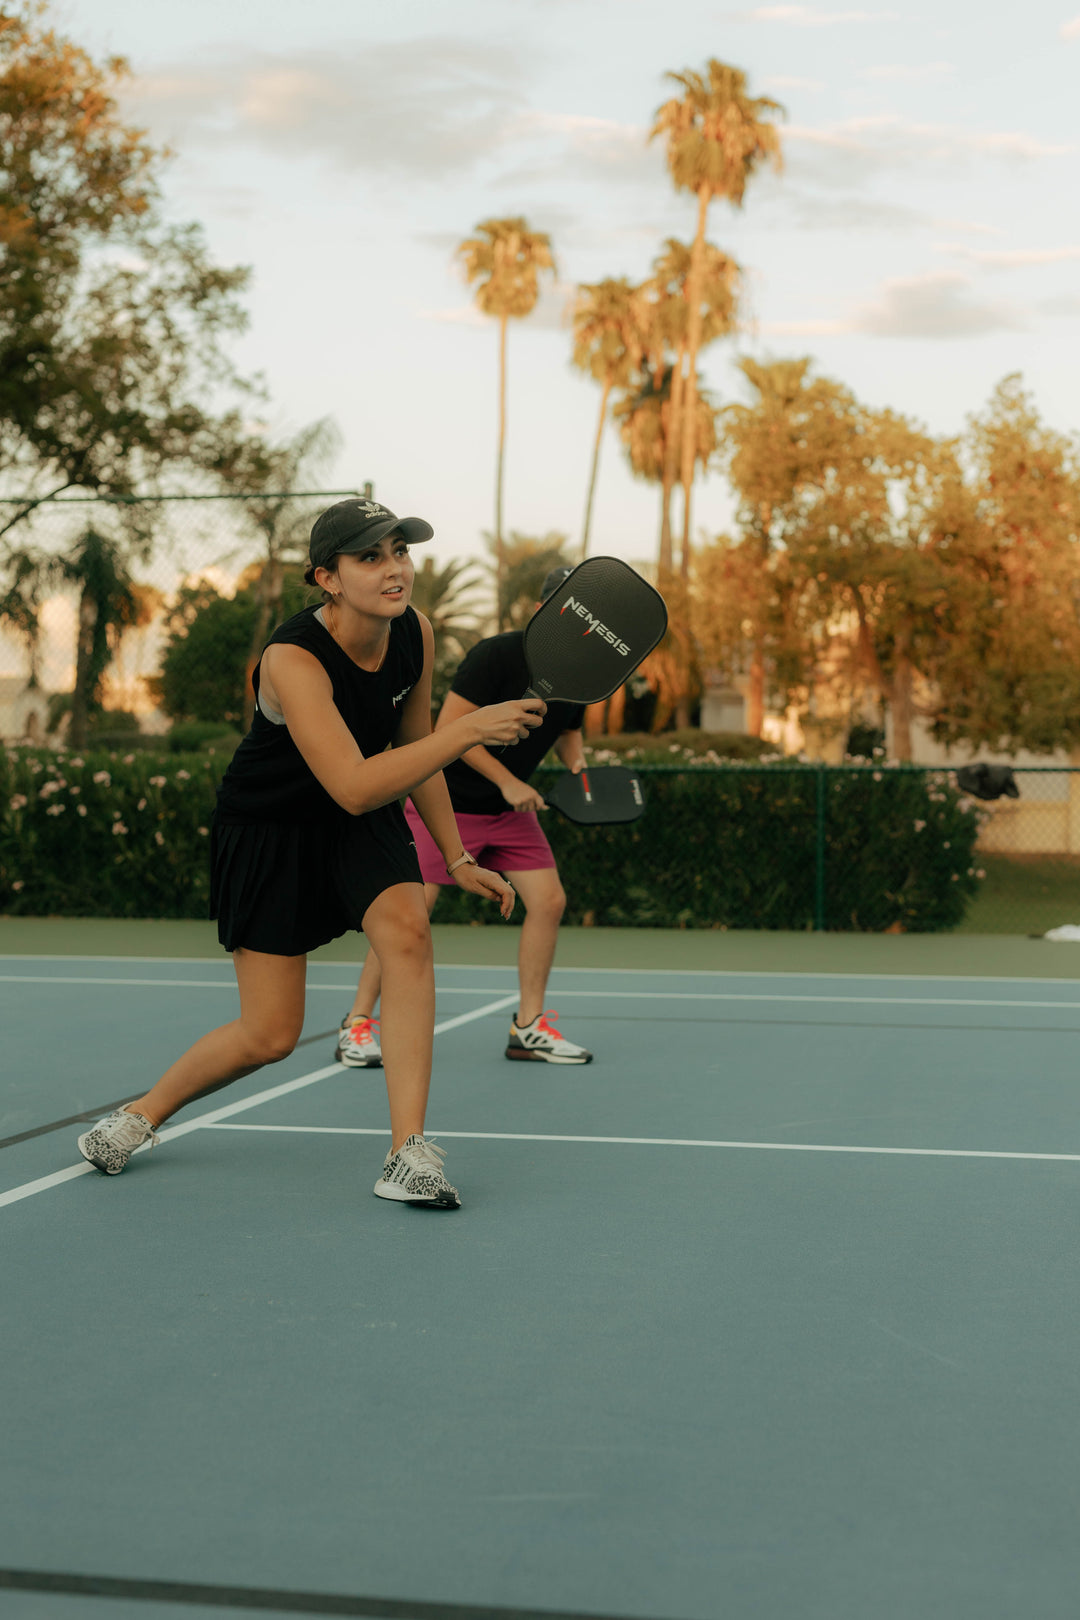 The Crucial Role of Dinking in the Sport of Pickleball